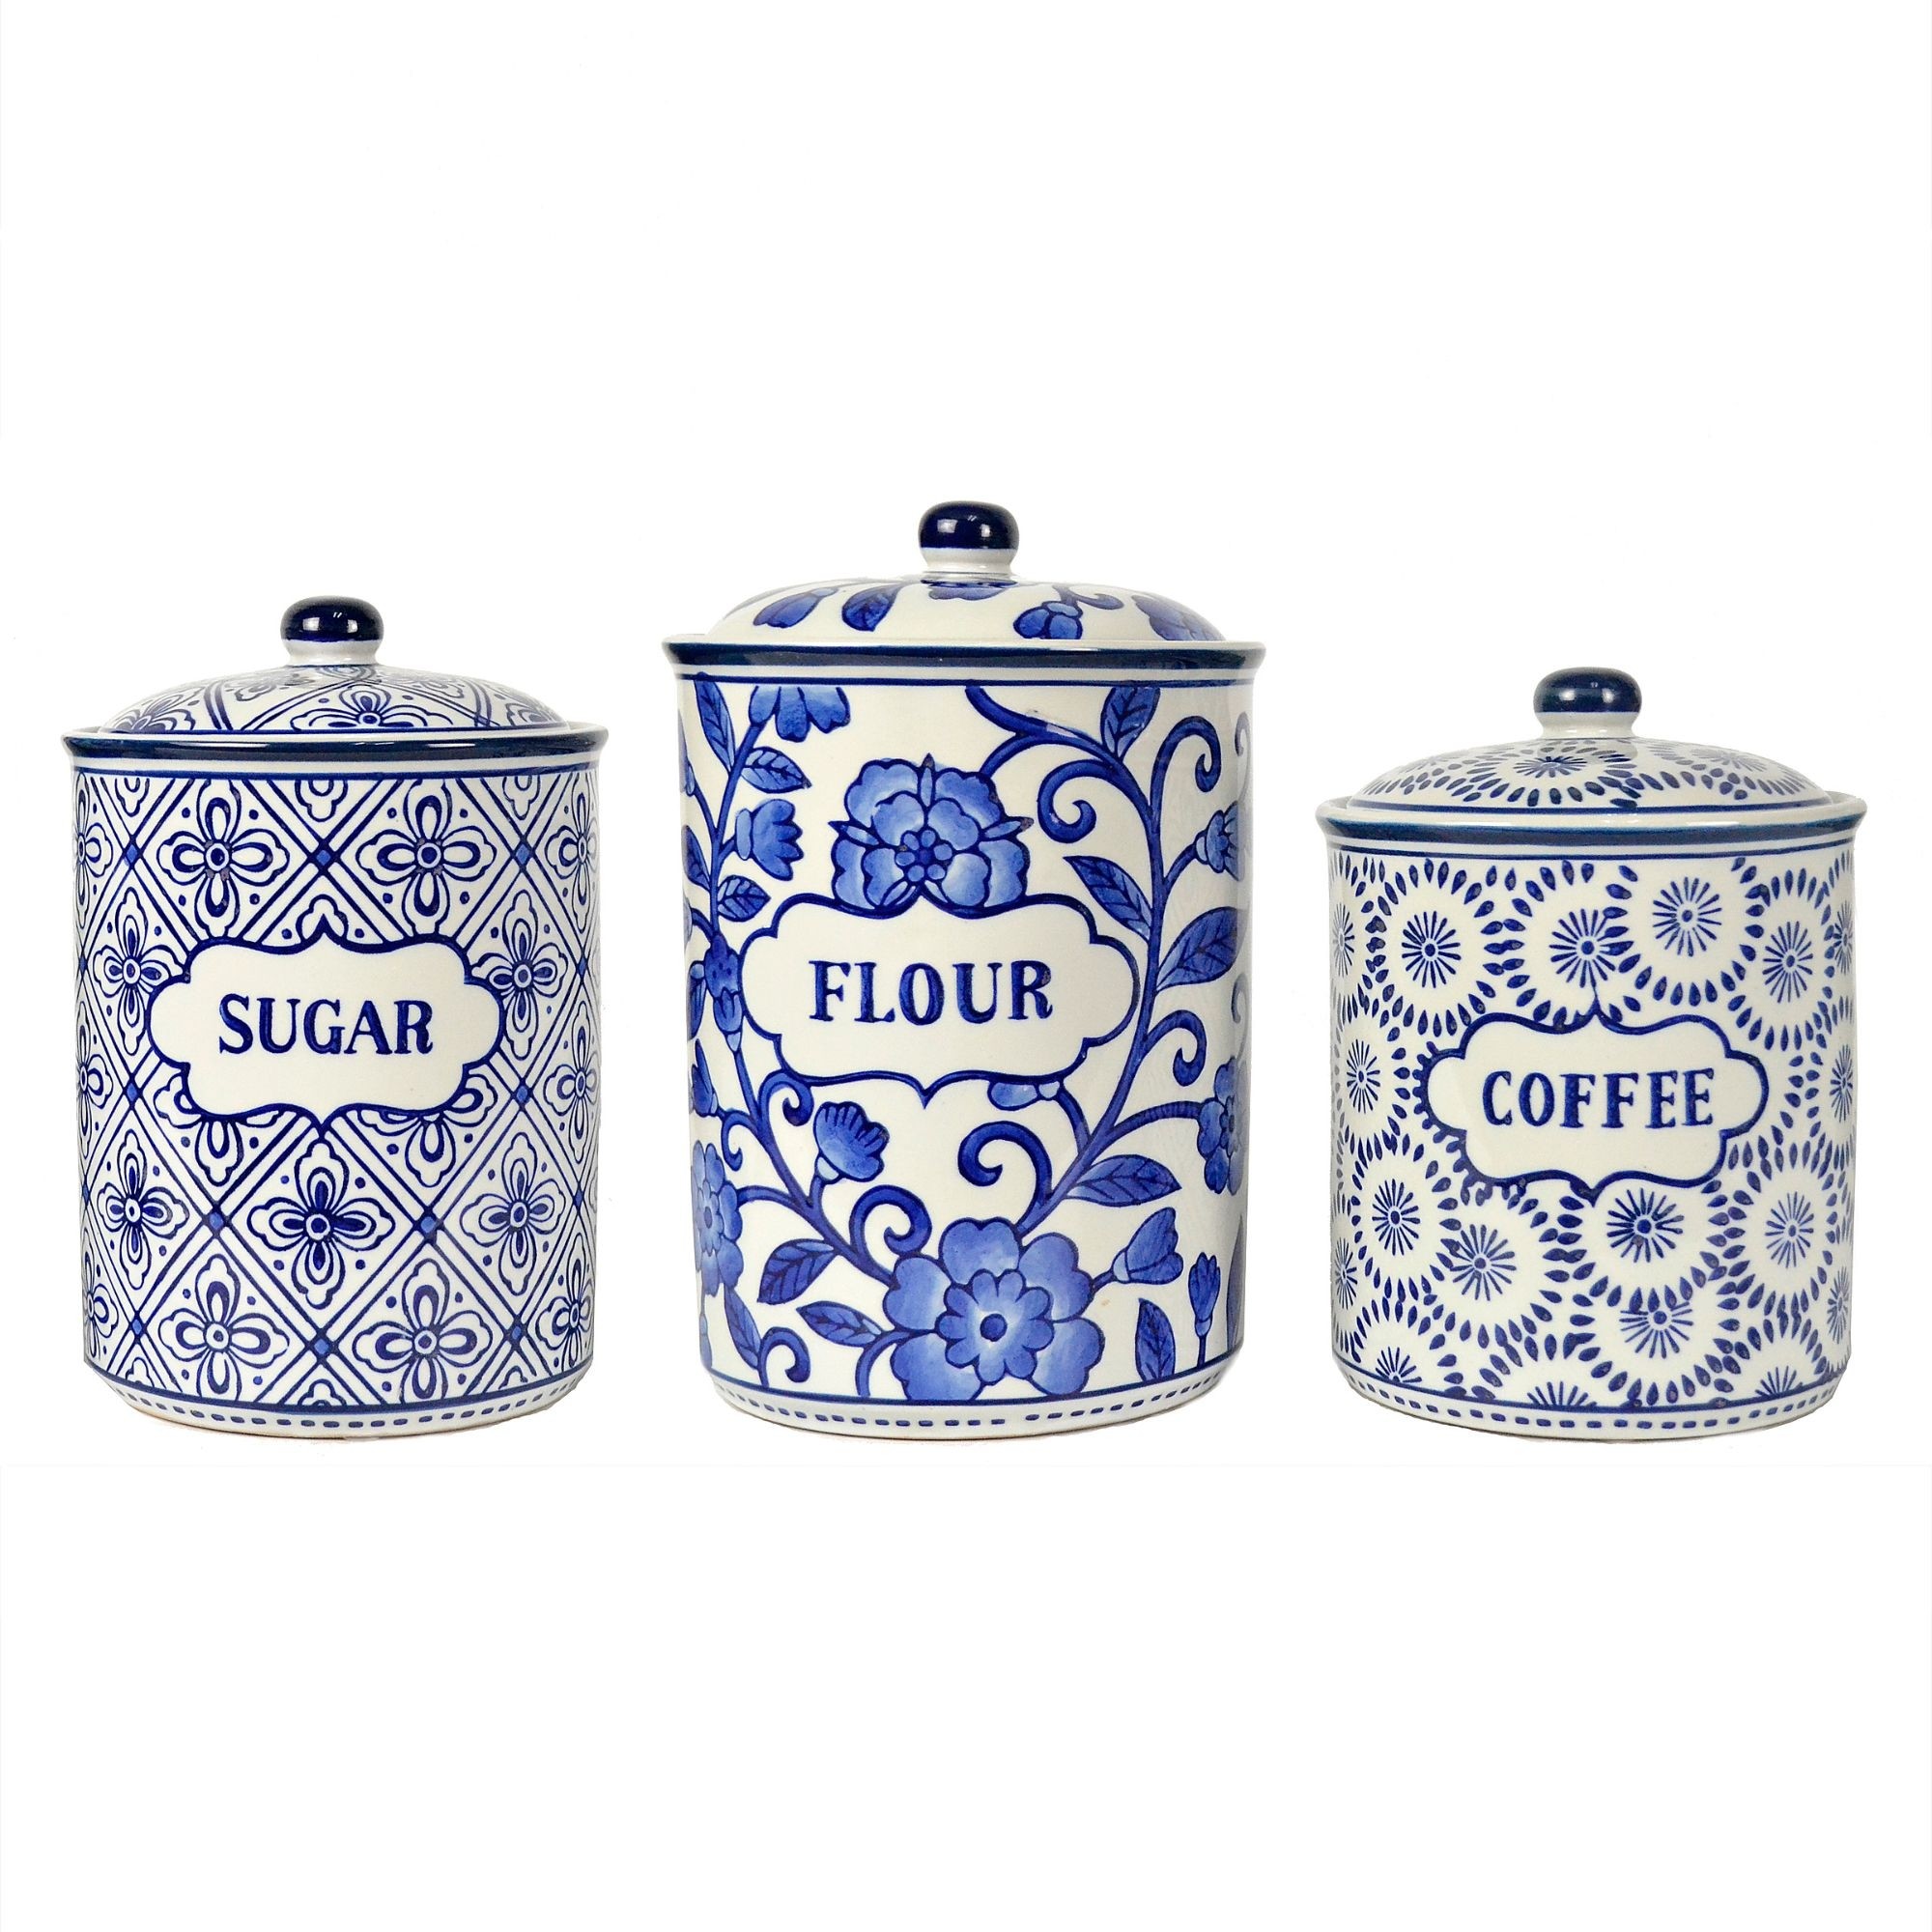 Old Fashioned Labeled Kitchen Canisters